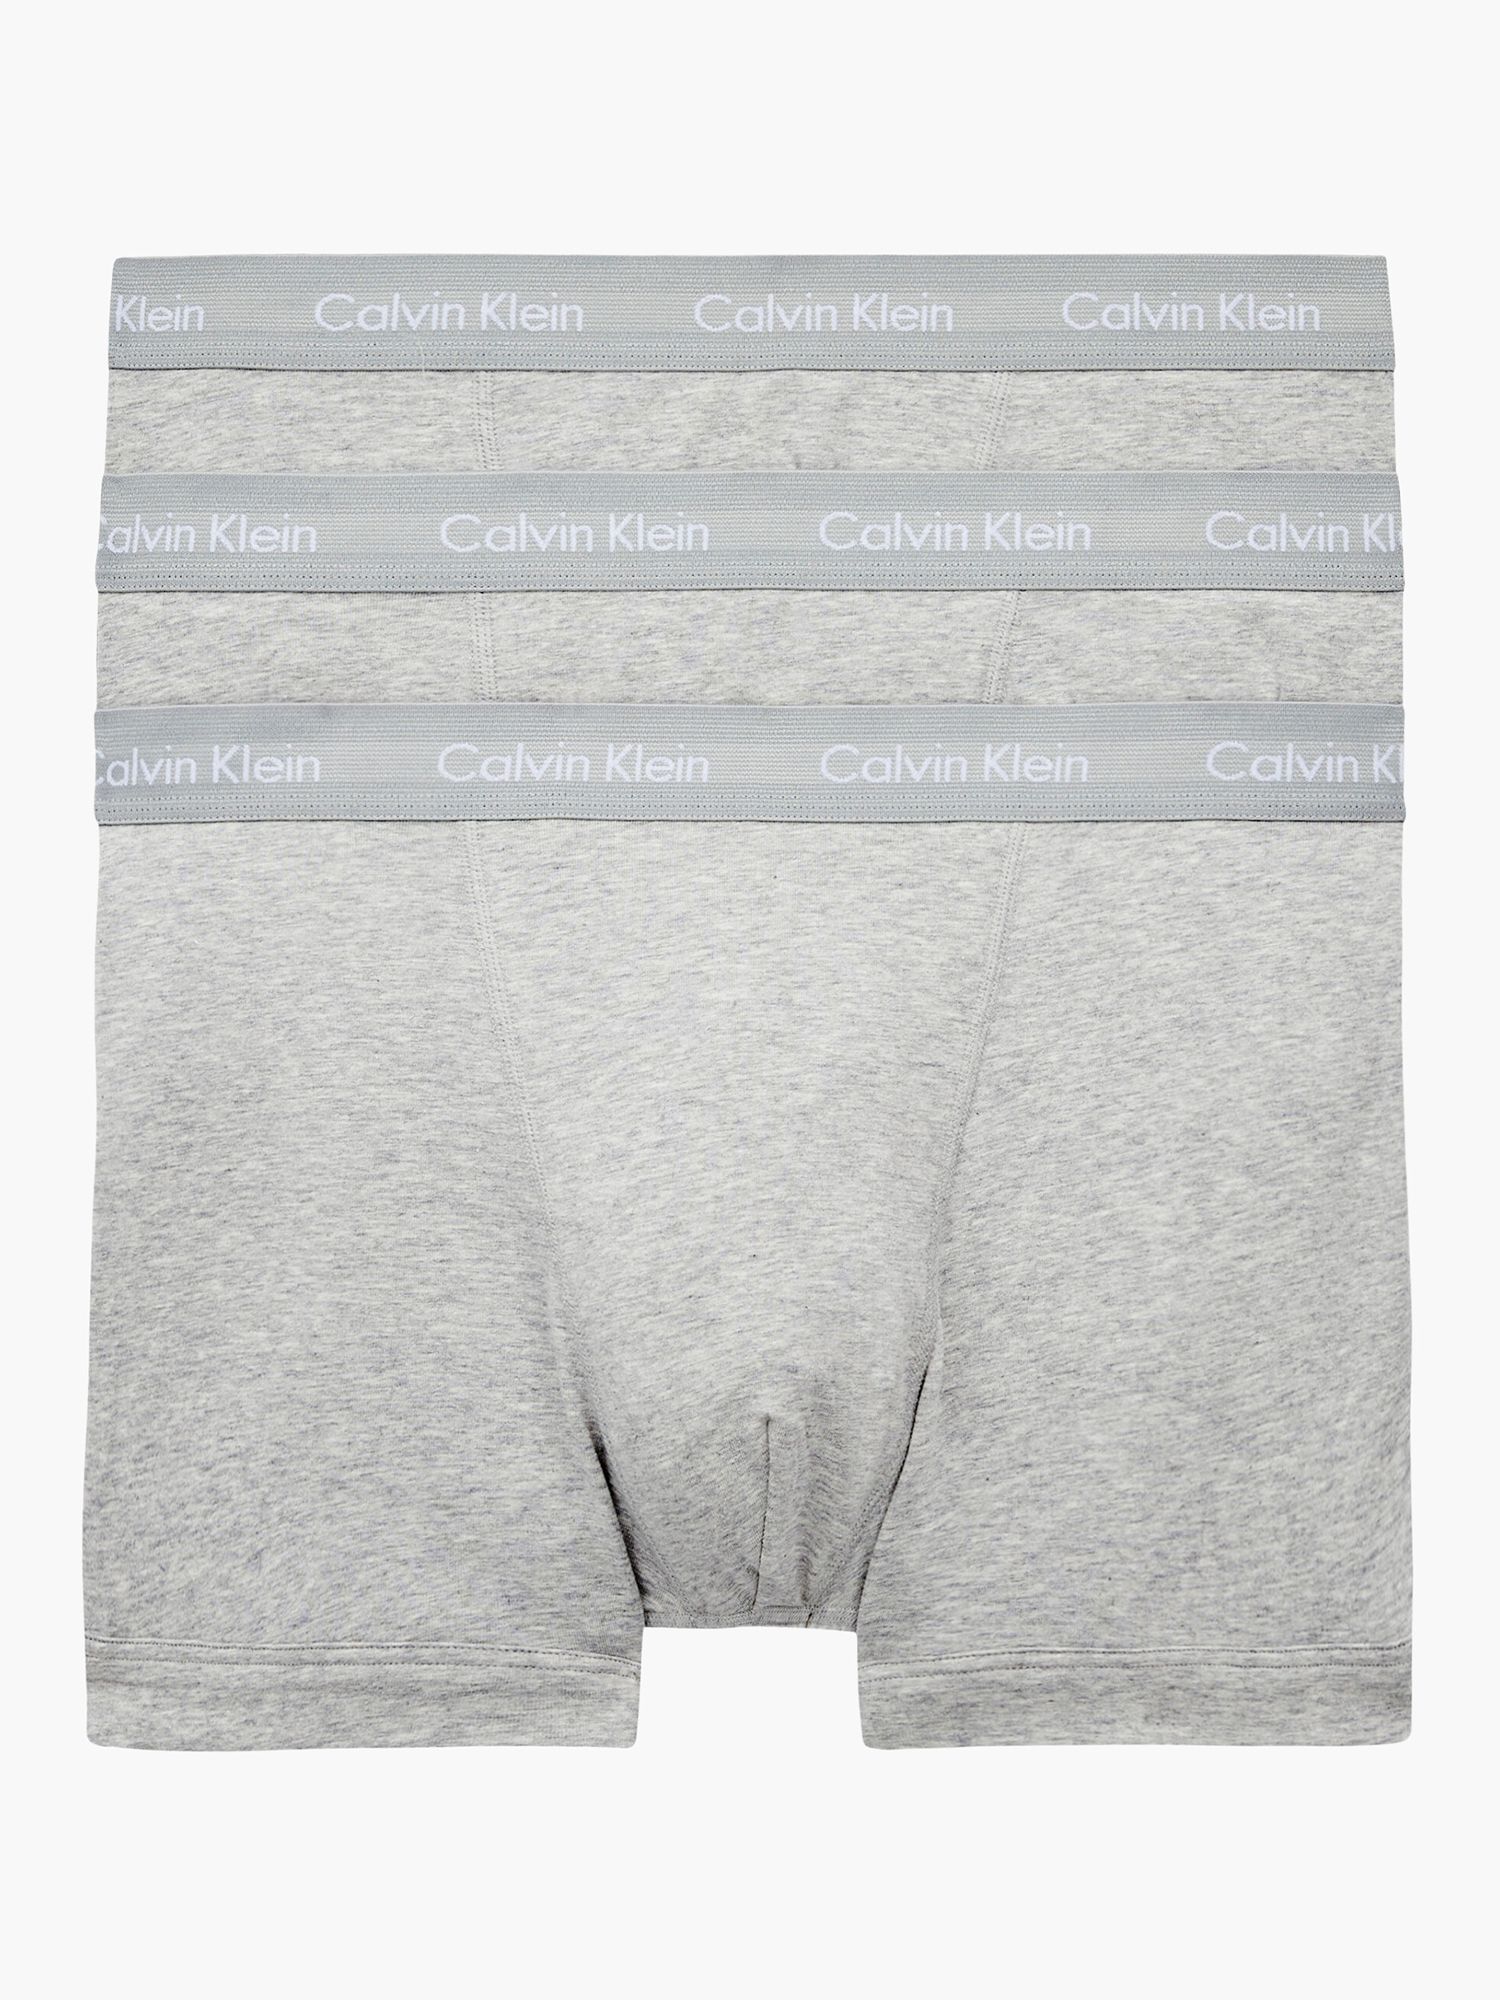 Calvin Klein Logo Embroidered Trunks, Pack of 3, Grey Heather, L